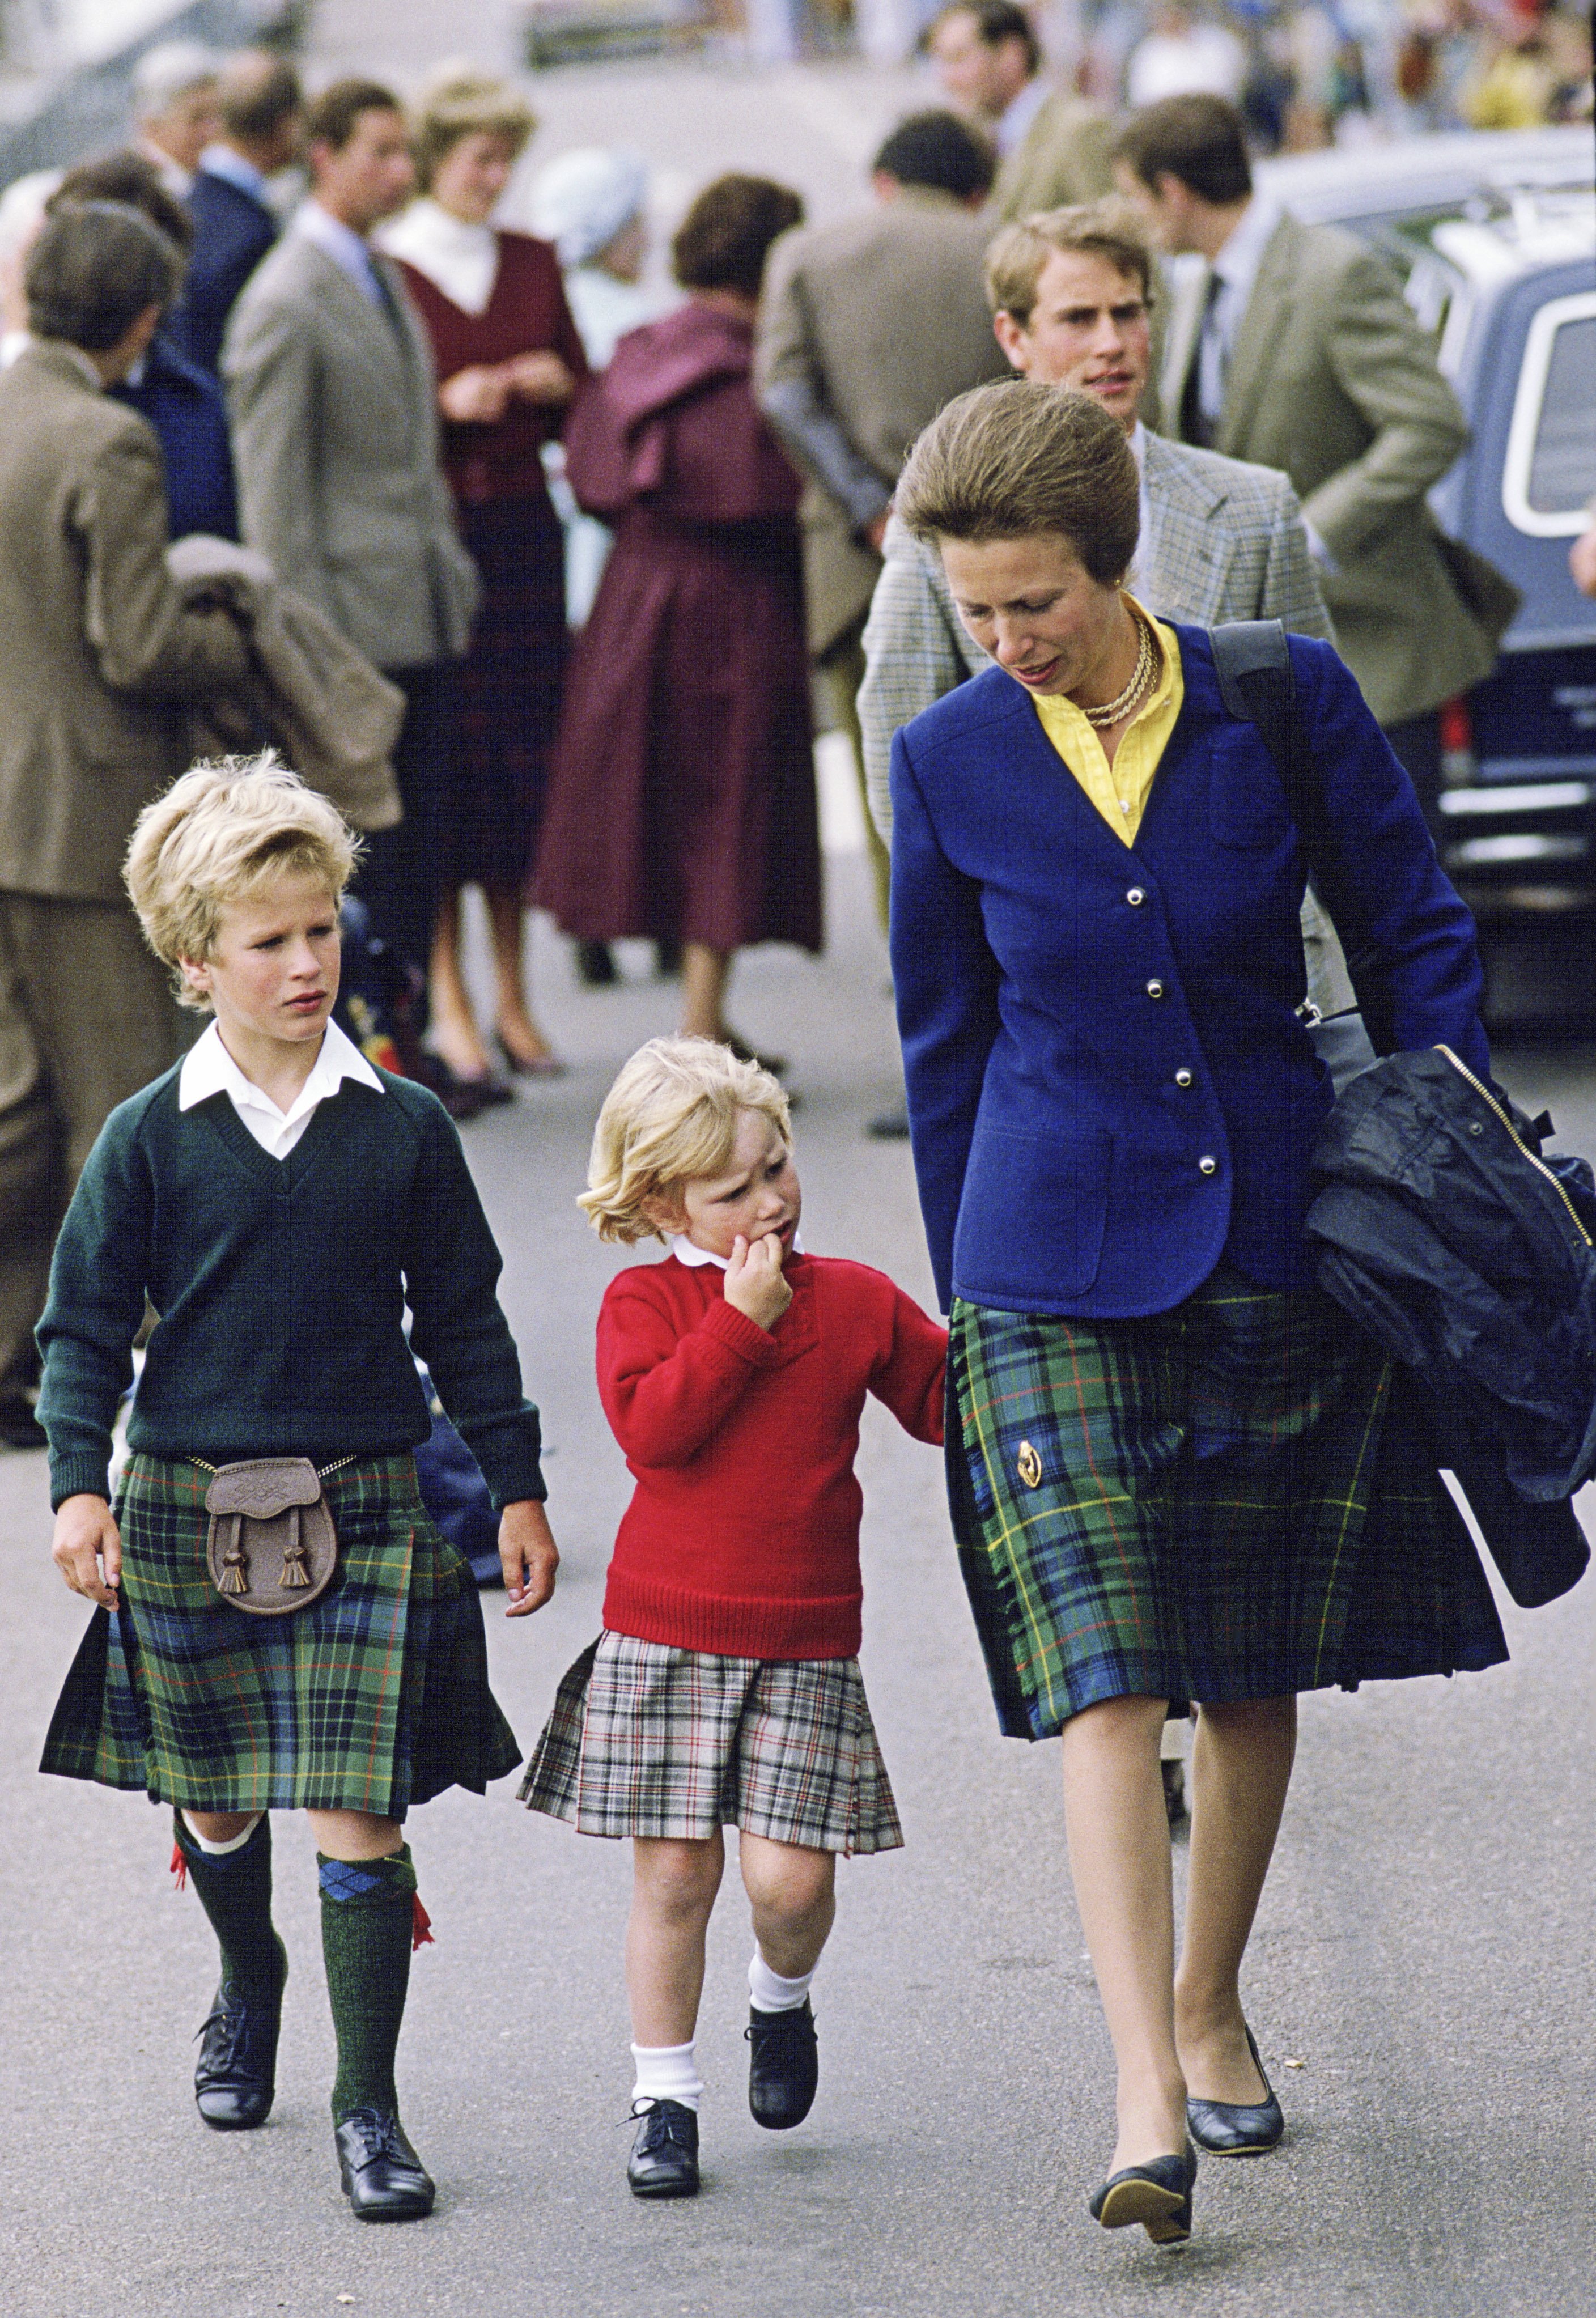 Princess Anne with children Zara and Peter Phillips. | Photo: Getty Images